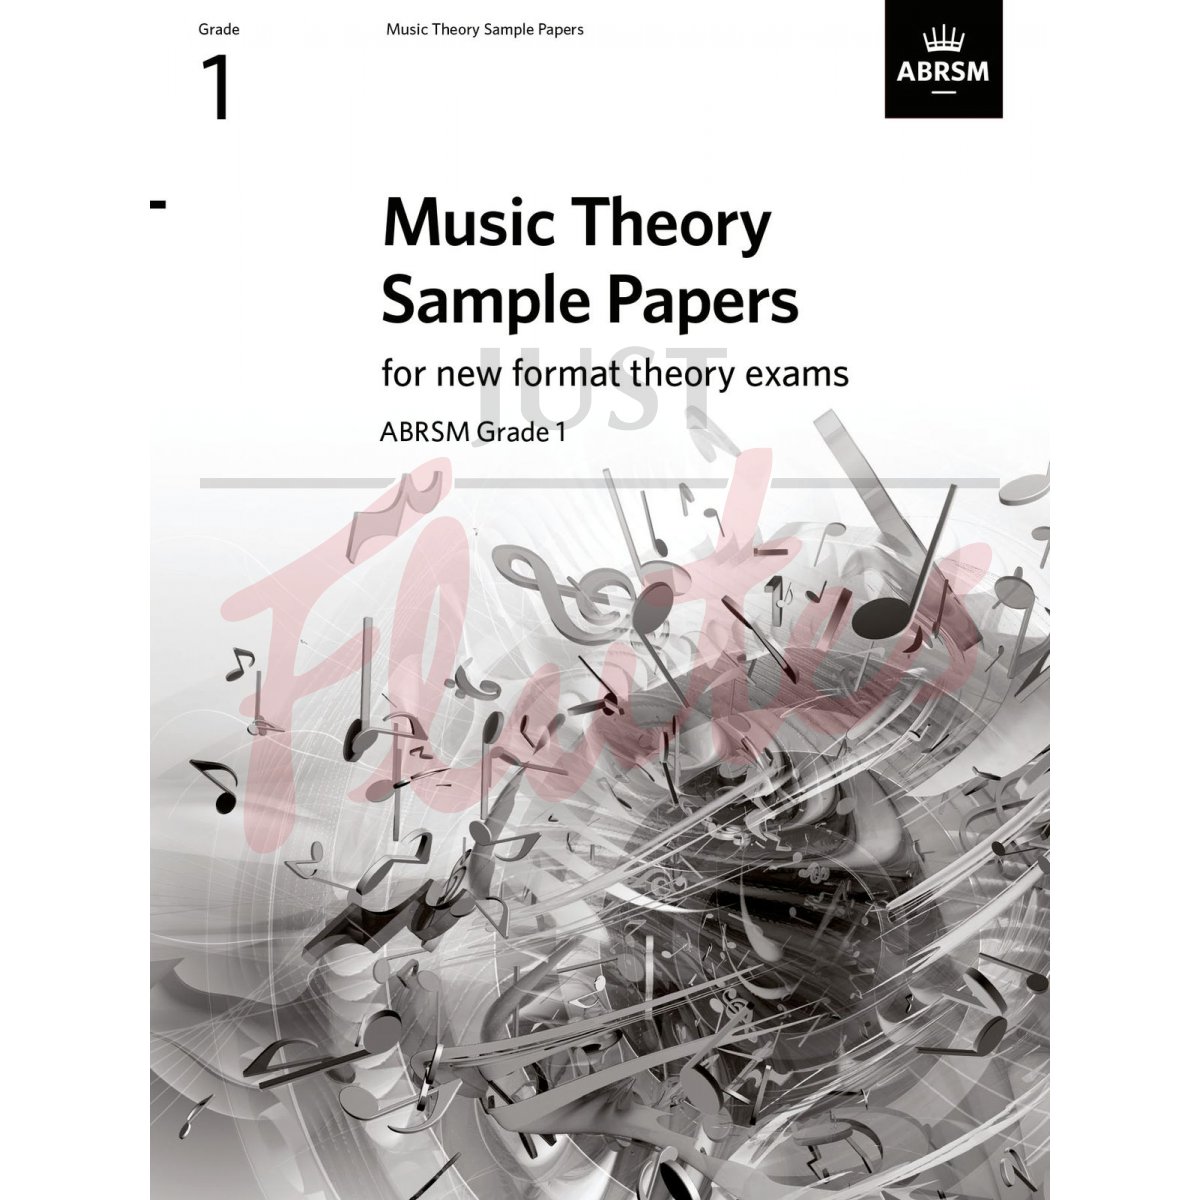 Music Theory Sample Papers Grade 1